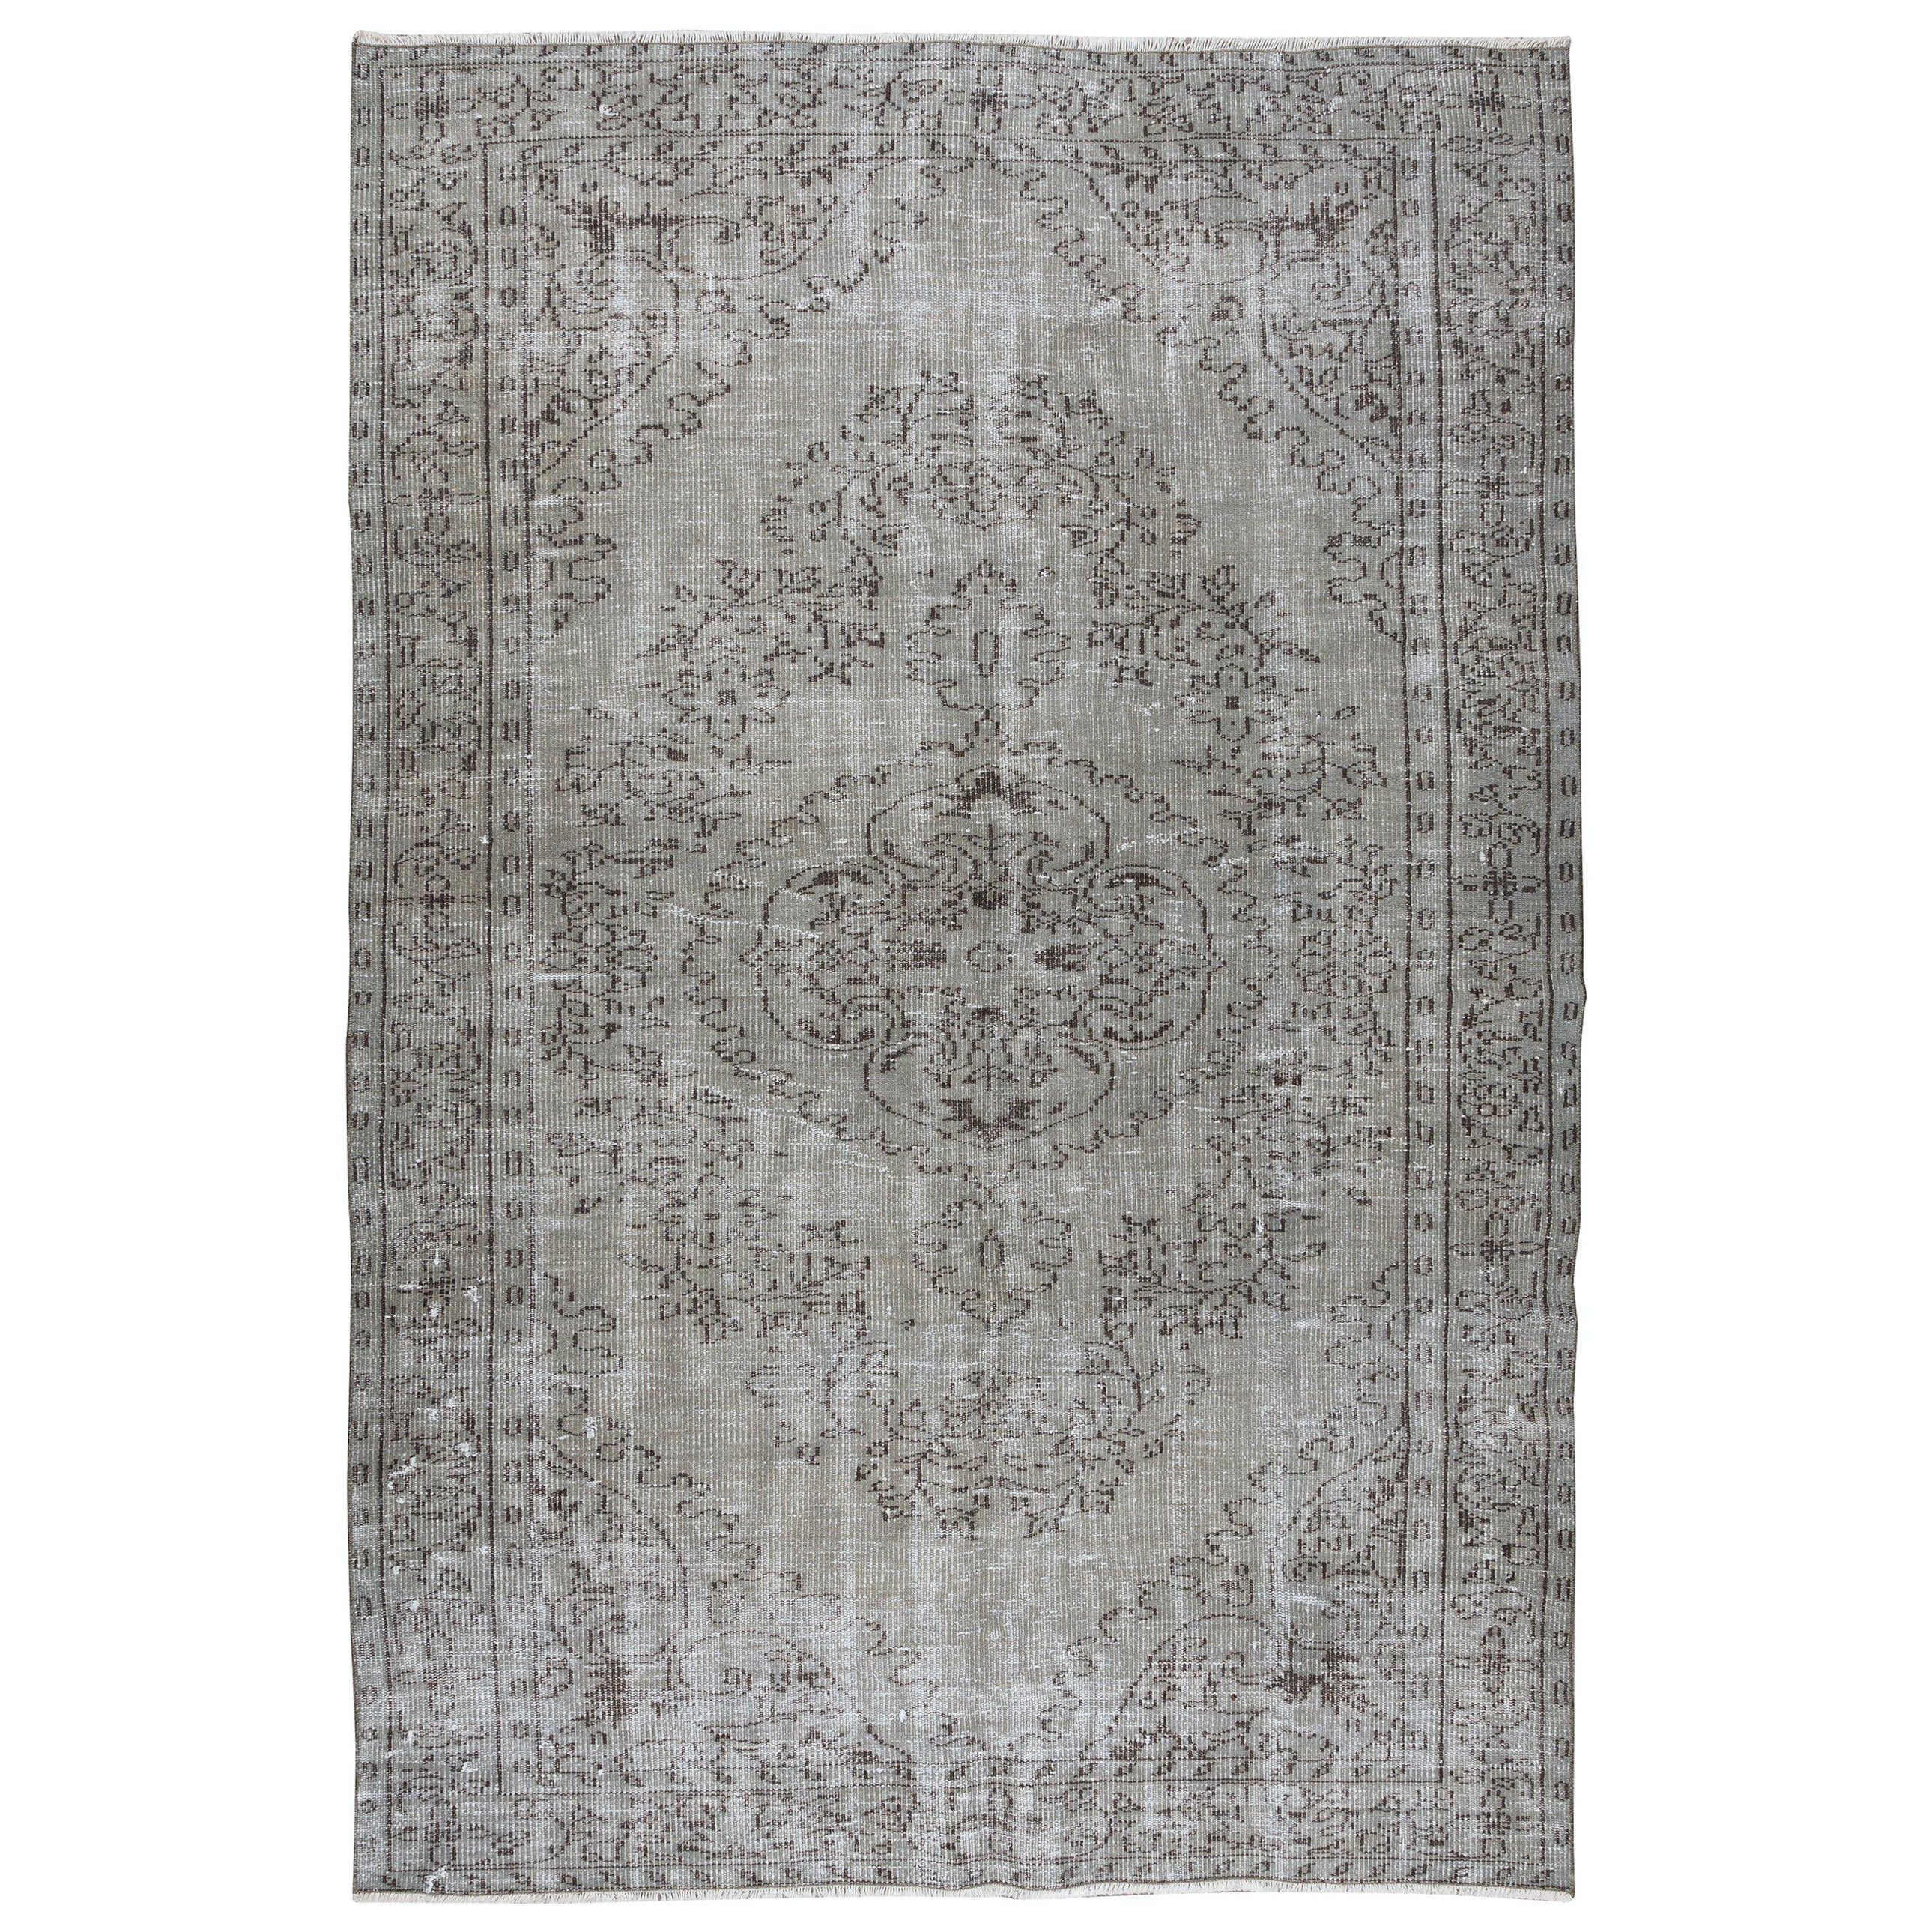 Handmade Vintage Turkish Area Rug Over-Dyed in Grey 4 Modern Interiors